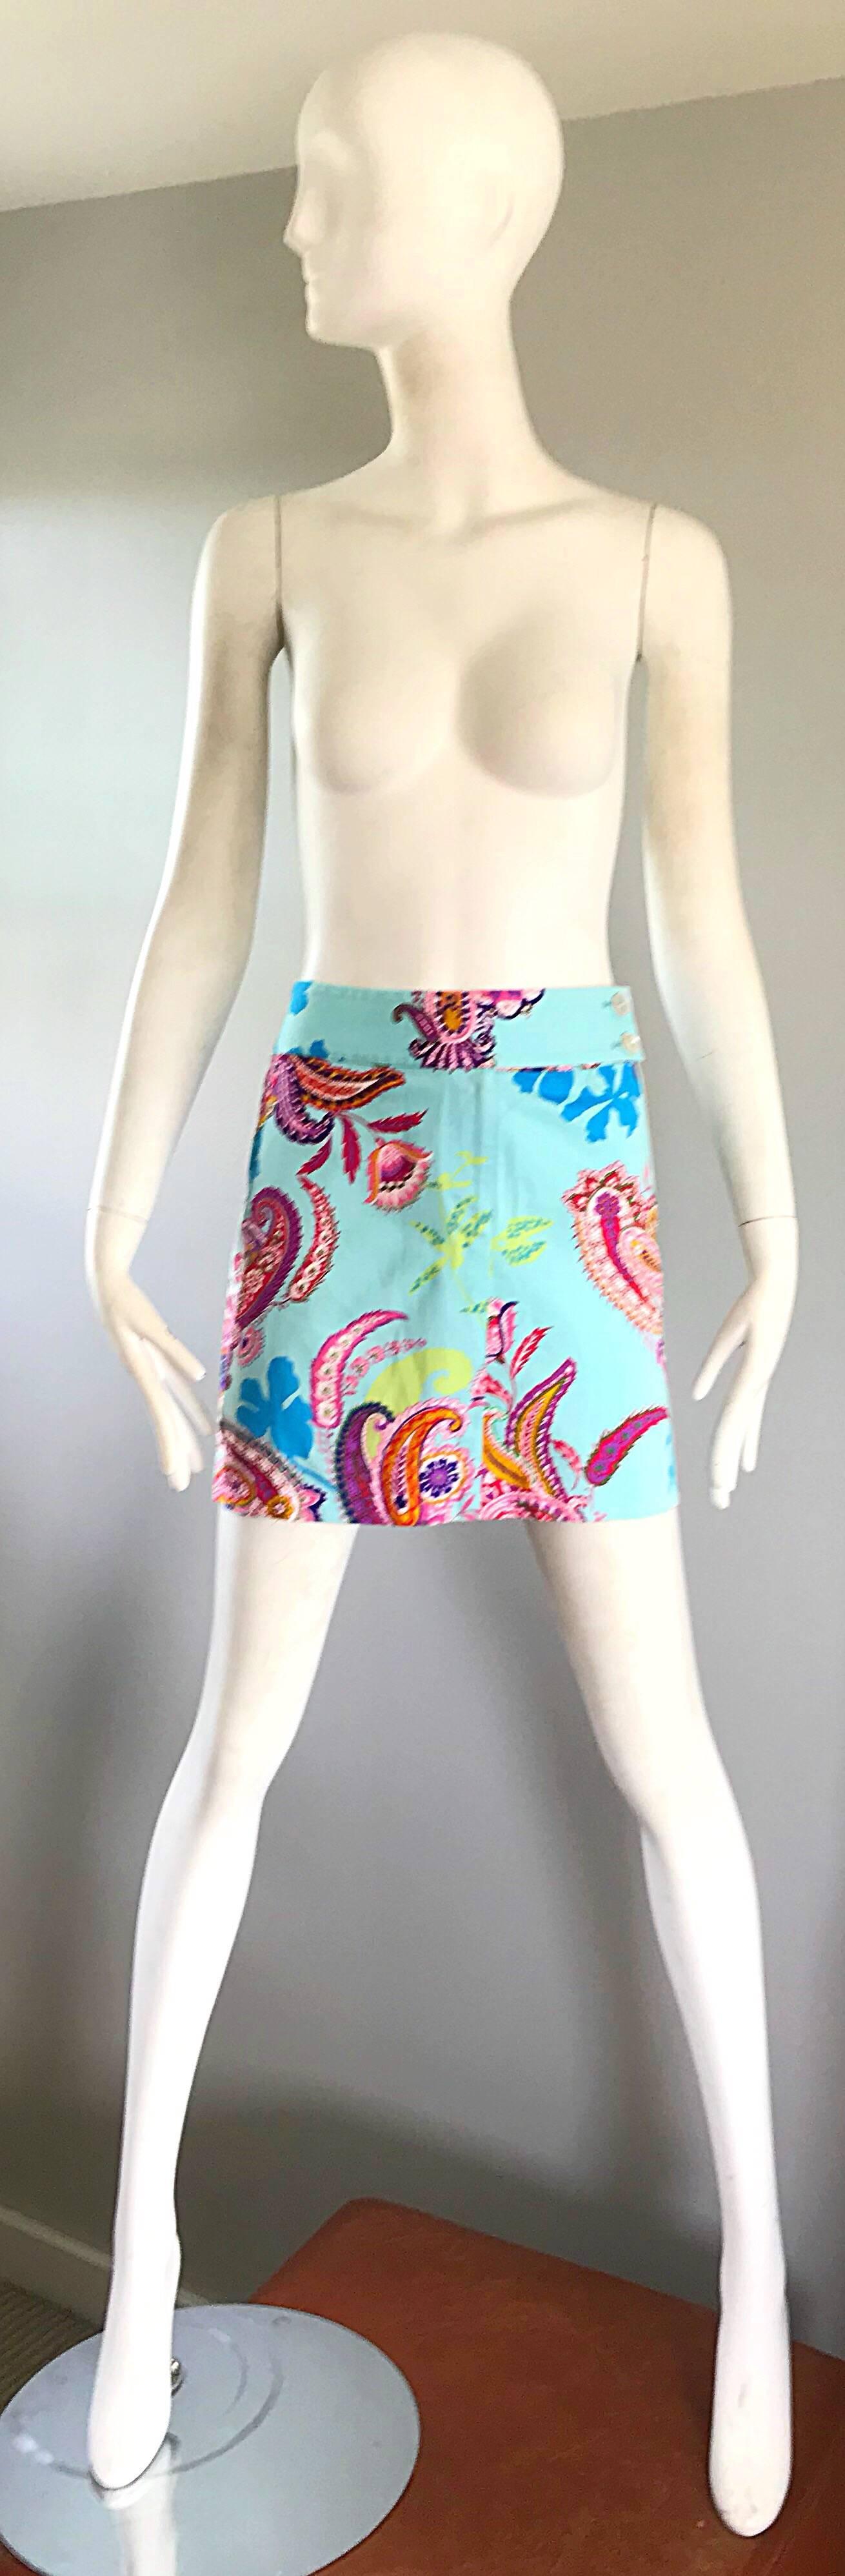 Stylish vintage early 90s RALPH LAUREN Black Label tropical paisley and flower print mini skirt! Features a light blue background, with floral paisley prints in pink, purple, red, turquoise, green and white. Zipper fly, with button and 
Hook-and-eye